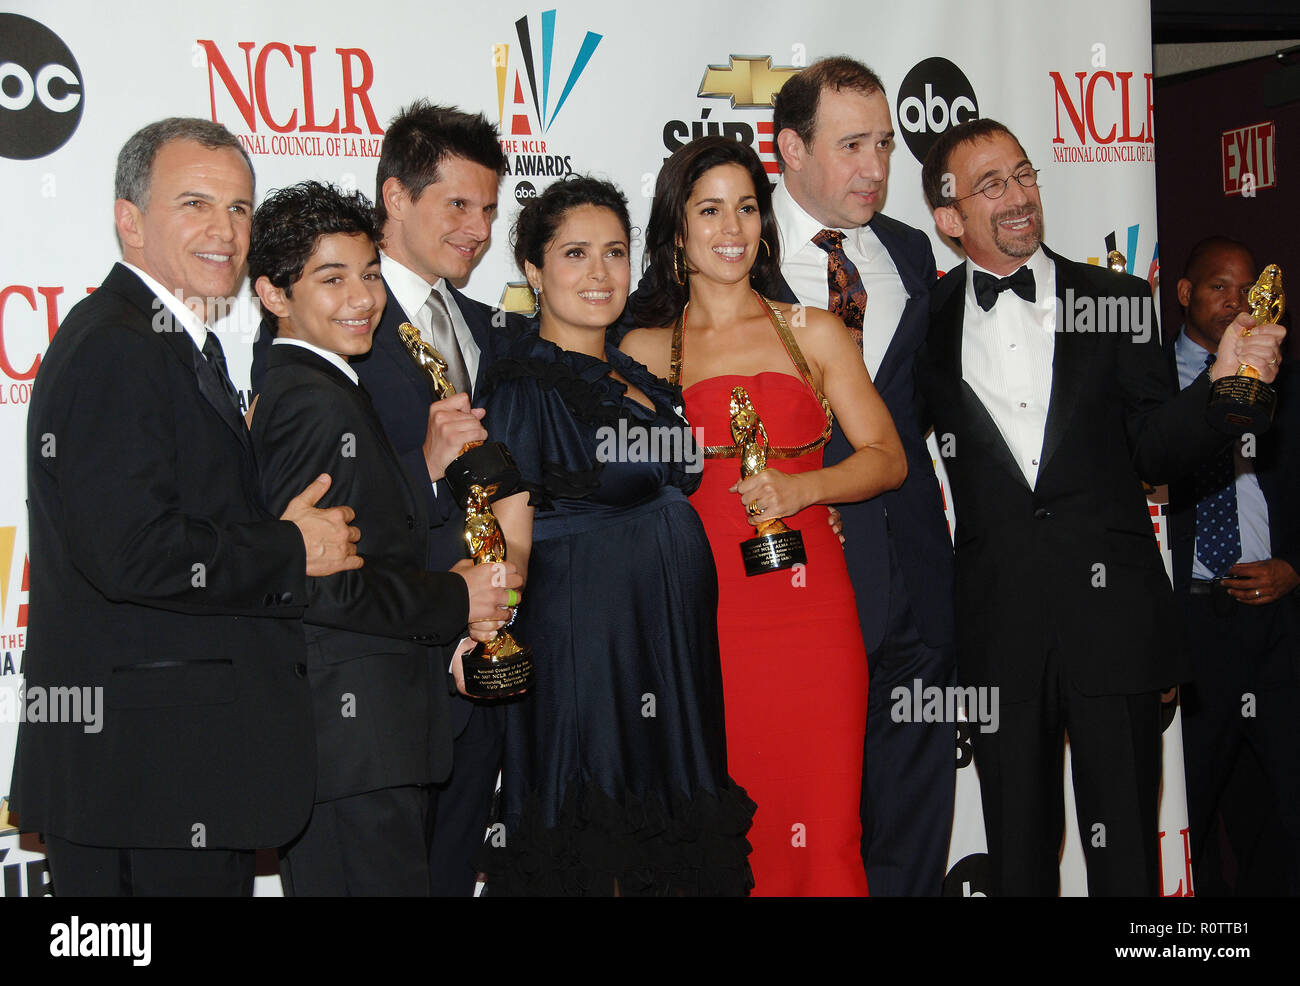 UGLY BETTY cast arriving at the ALMA Awards at the Pasadena Auditorium In Los Angeles.  full length cast           -            UGLY BETTY cast 237.jp Stock Photo